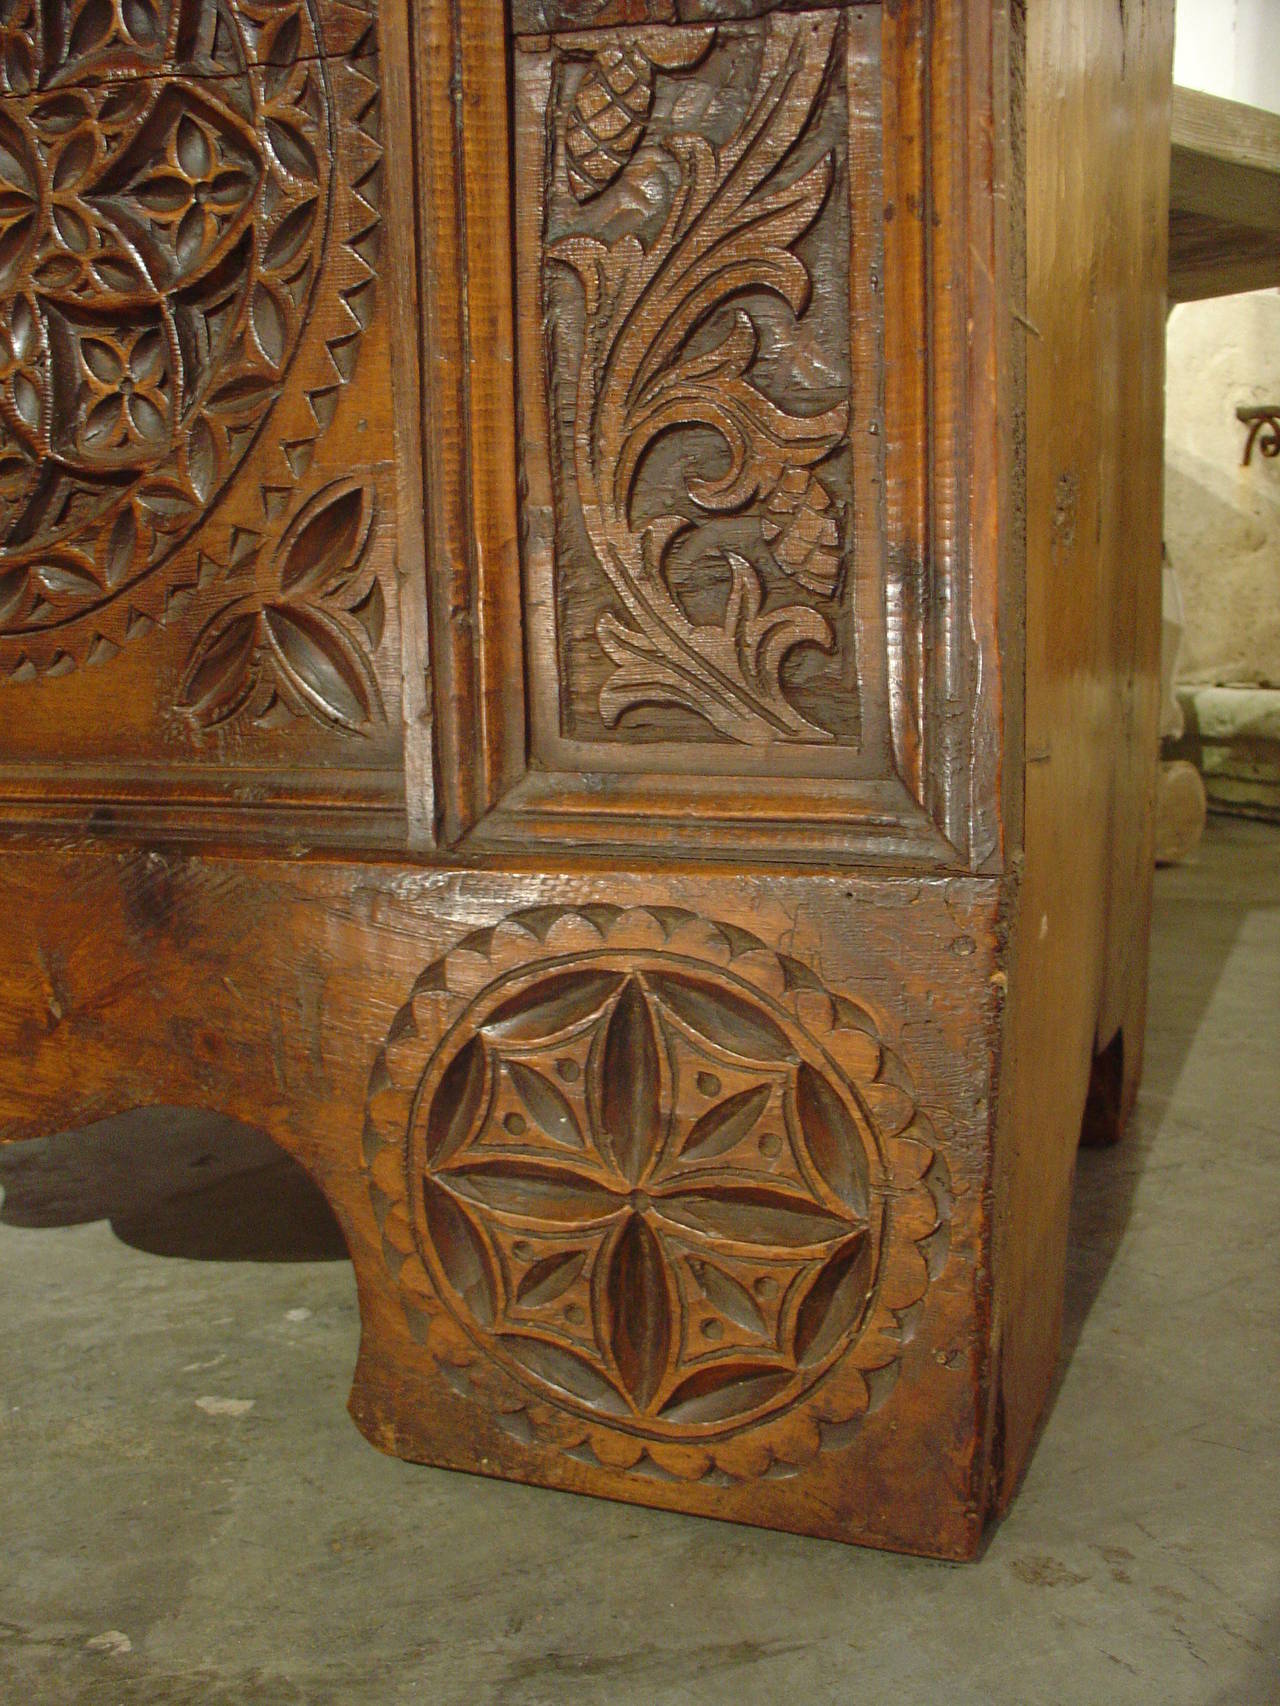 This impressive 18th C. wooden trunk from Switzerland has interesting and deeply, hand carved motifs on its top and front. This may have been a wedding trunk because of the different shapes of the shields depicted on the top indented panels.  One